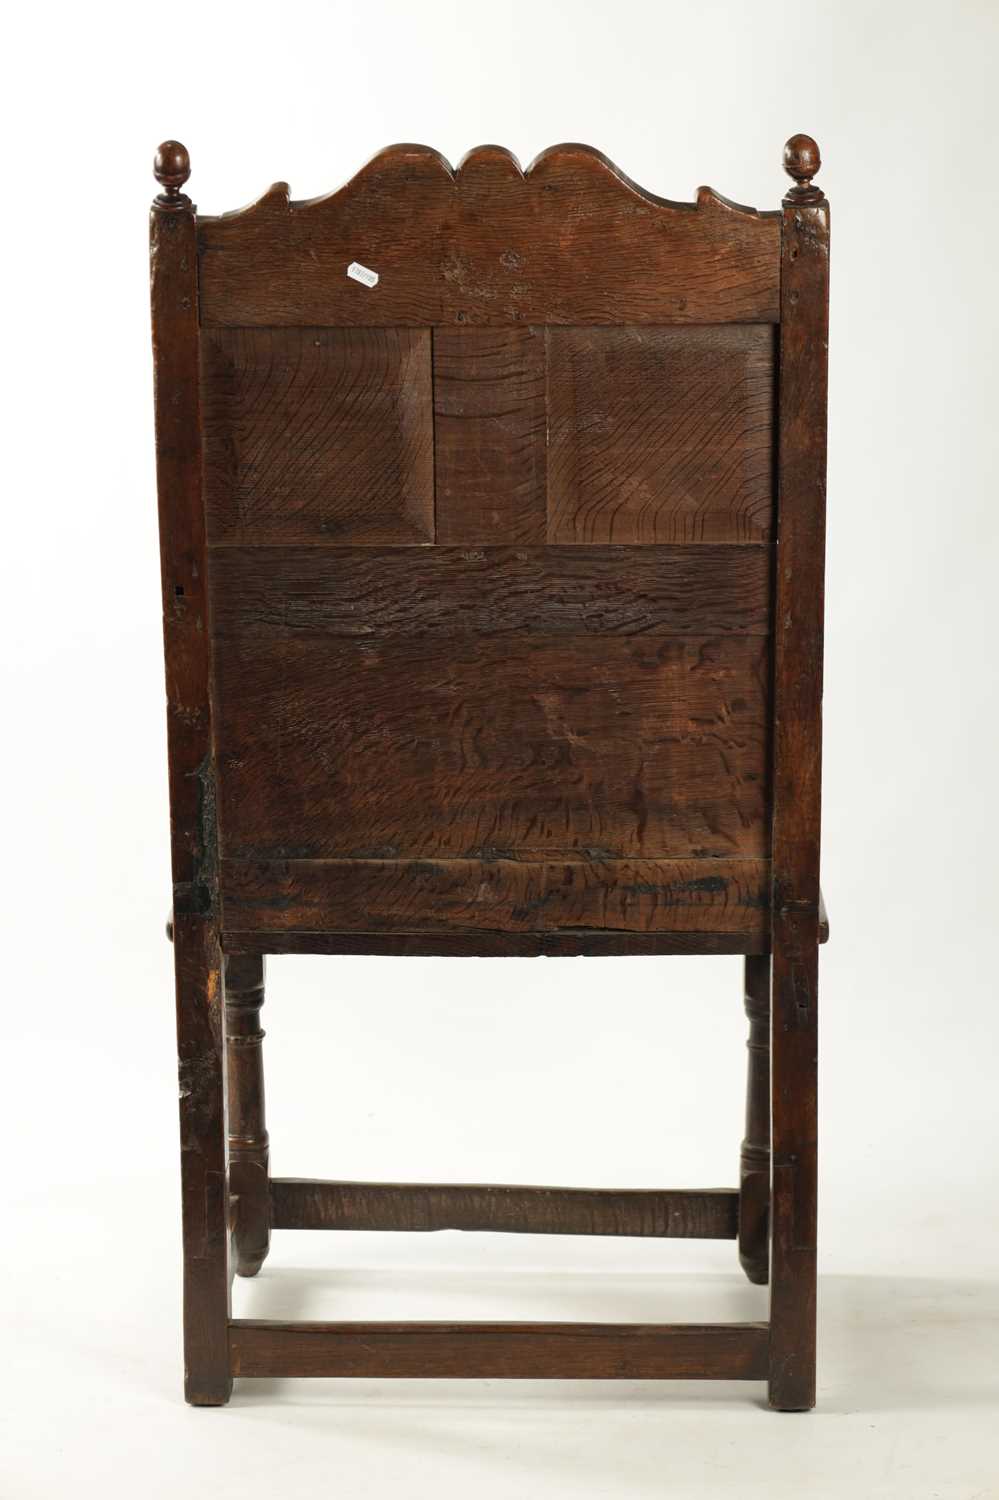 A 17TH CENTURY CARVED OAK JACOBEAN STYLE WAINSCOT CHAIR - Image 7 of 13